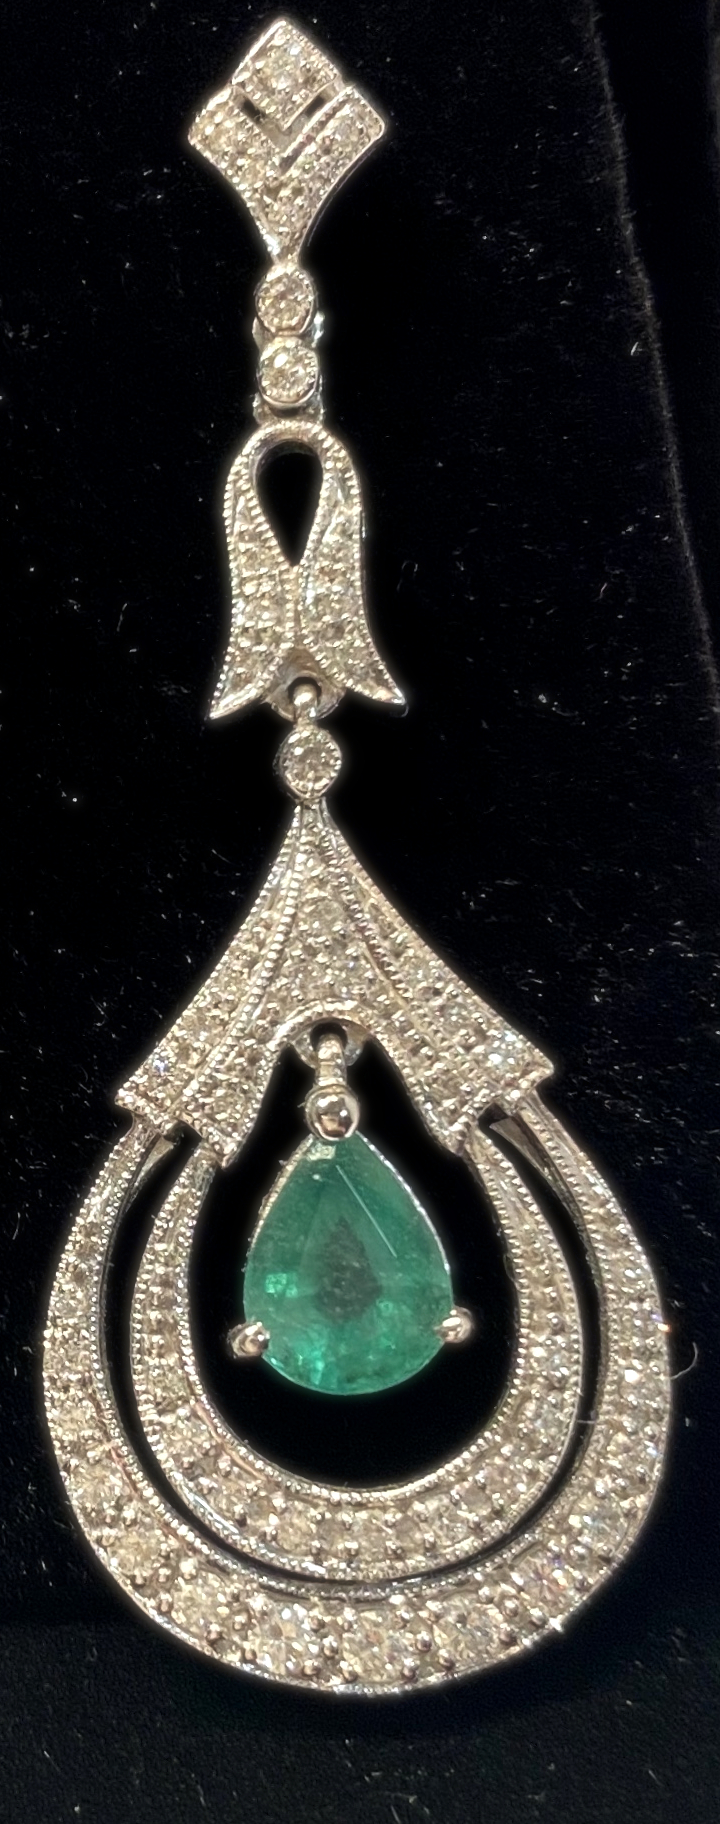 AN EXCEPTIONAL PAIR OF 18CT WHITE GOLD EMERALD & DIAMOND DROP EARRINGS, Art Deco style, handmade, - Image 4 of 5